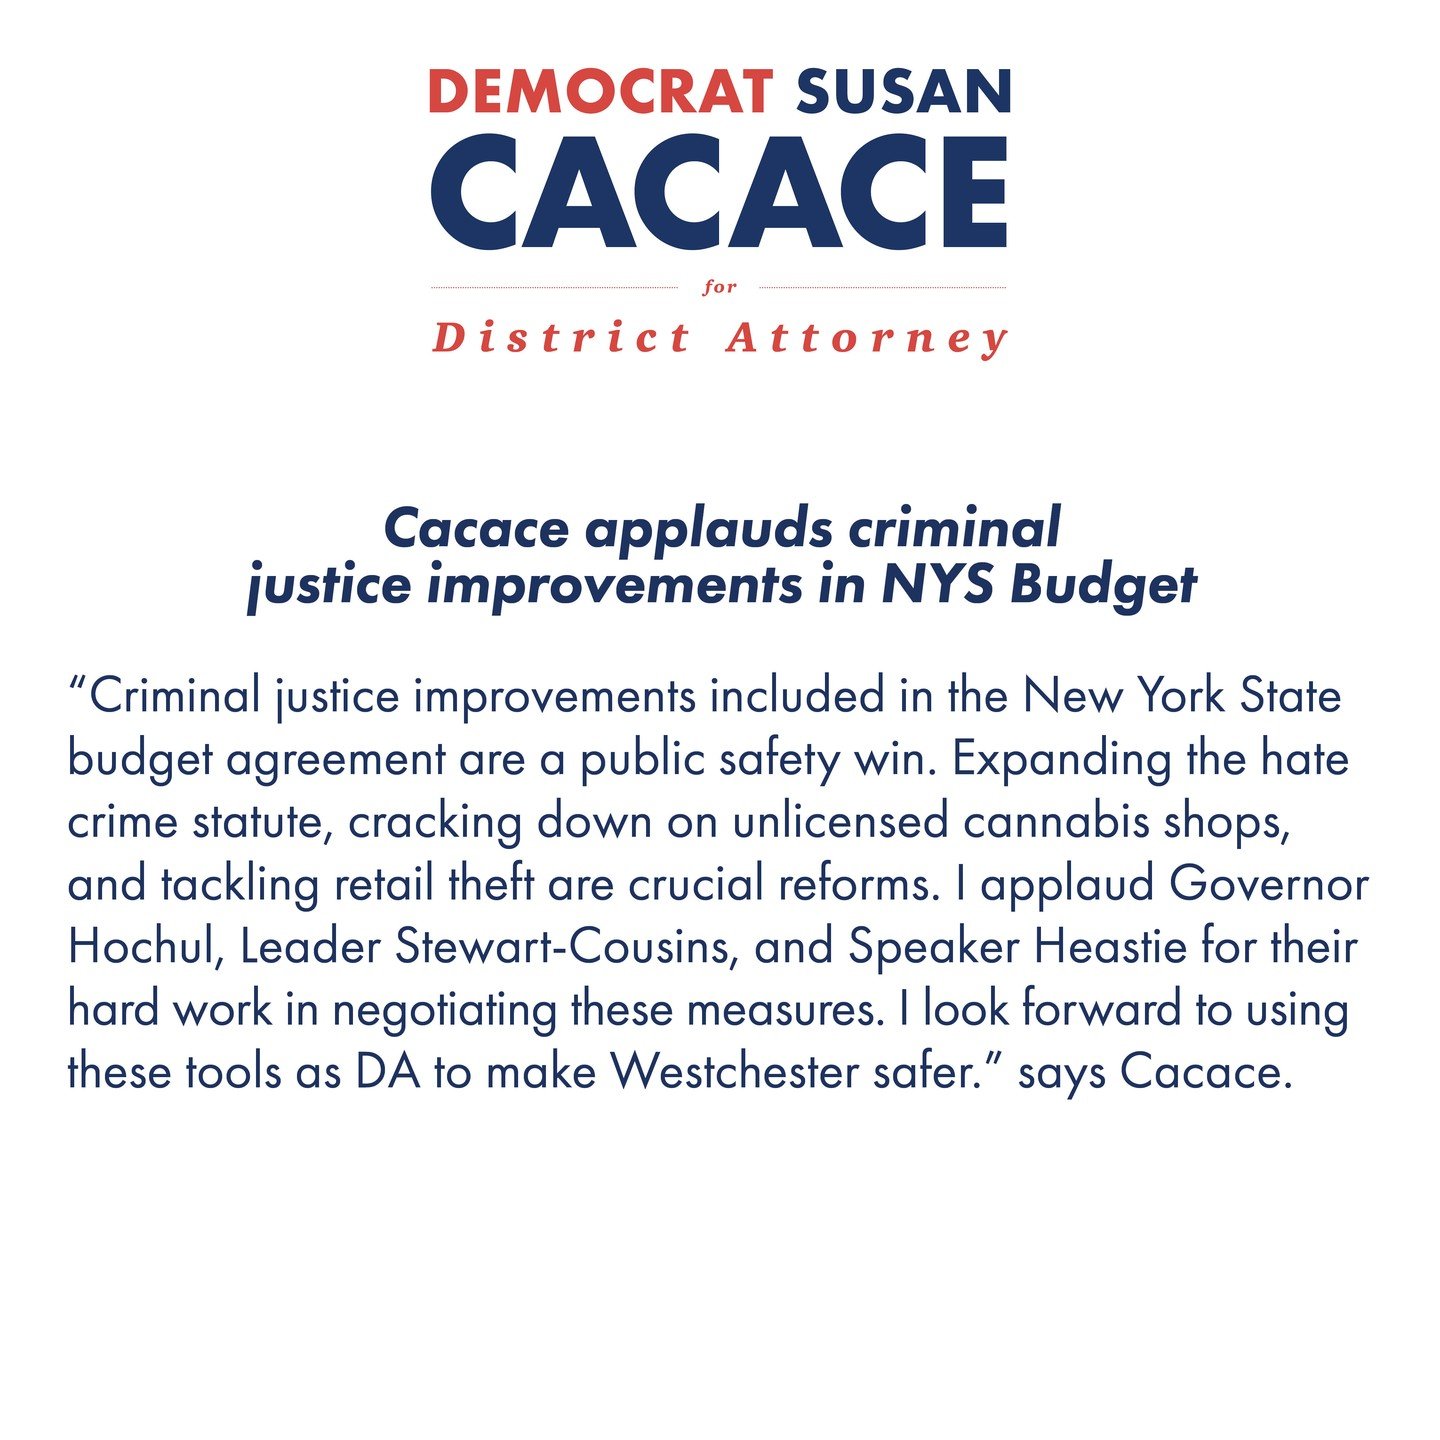 &ldquo;Criminal justice improvements included in the New York State budget agreement are a public safety win. Expanding the hate crime statute, cracking down on unlicensed cannabis shops, and tackling retail theft are crucial reforms. I applaud Gover